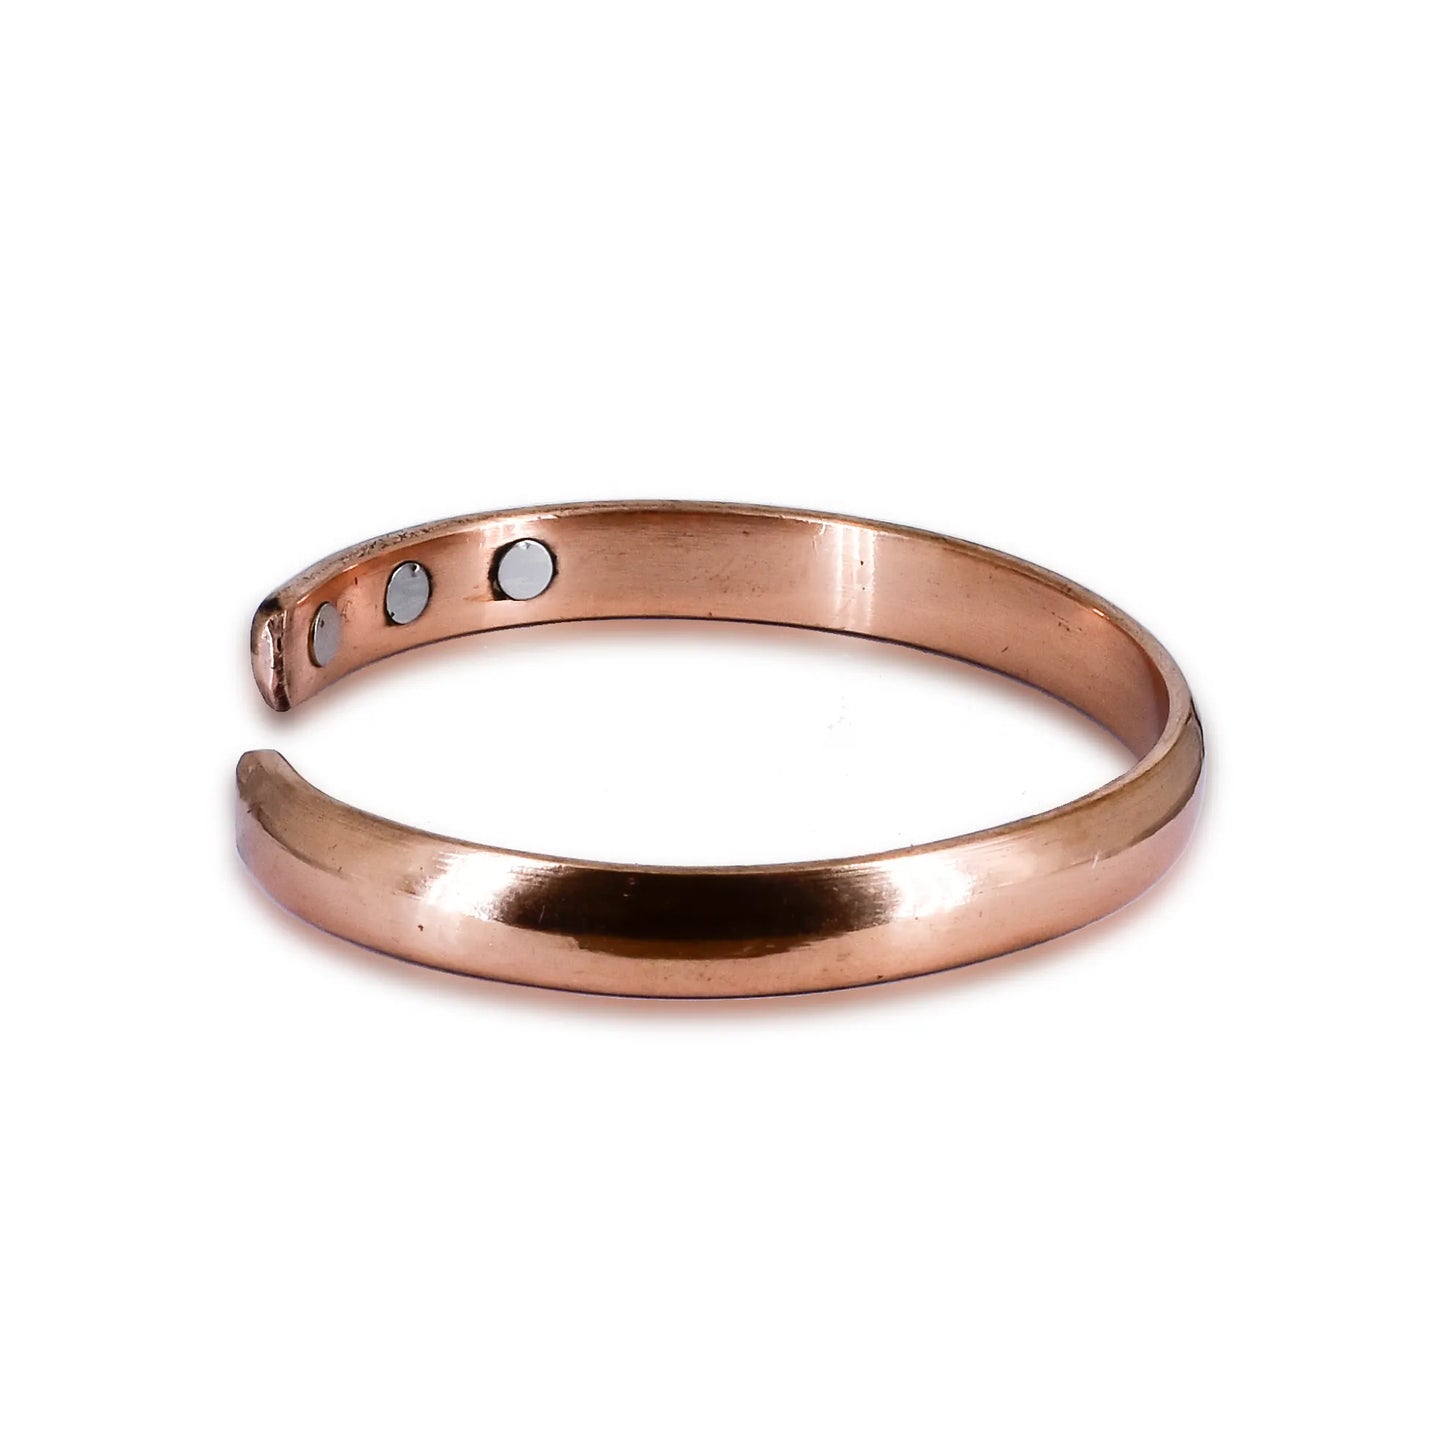 Magnetic Copper Kada Plain Design  a harmonious blend of elegance, tradition, and the potential health benefits of magnetic copper. Crafted with care, this kada seamlessly combines simplicity with sophistication.